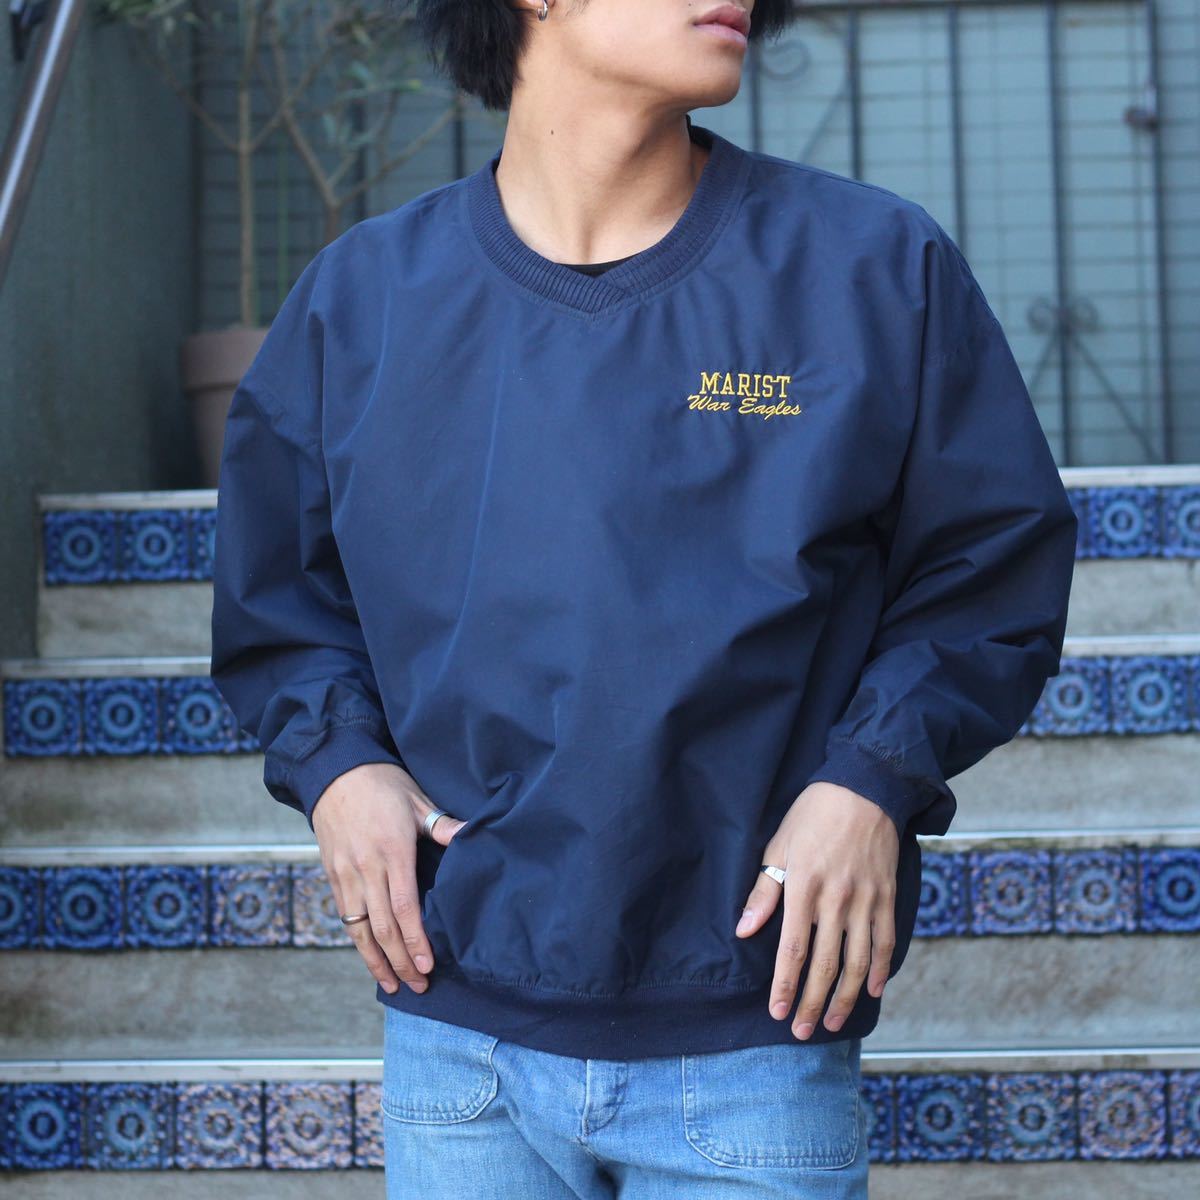 USA VINTAGE GEAR FOR SPORTS EMBROIDERY DESIGN PULL OVER GAME SHIRT/アメリカ古着刺繍デザインプルオーバーゲームシャツ